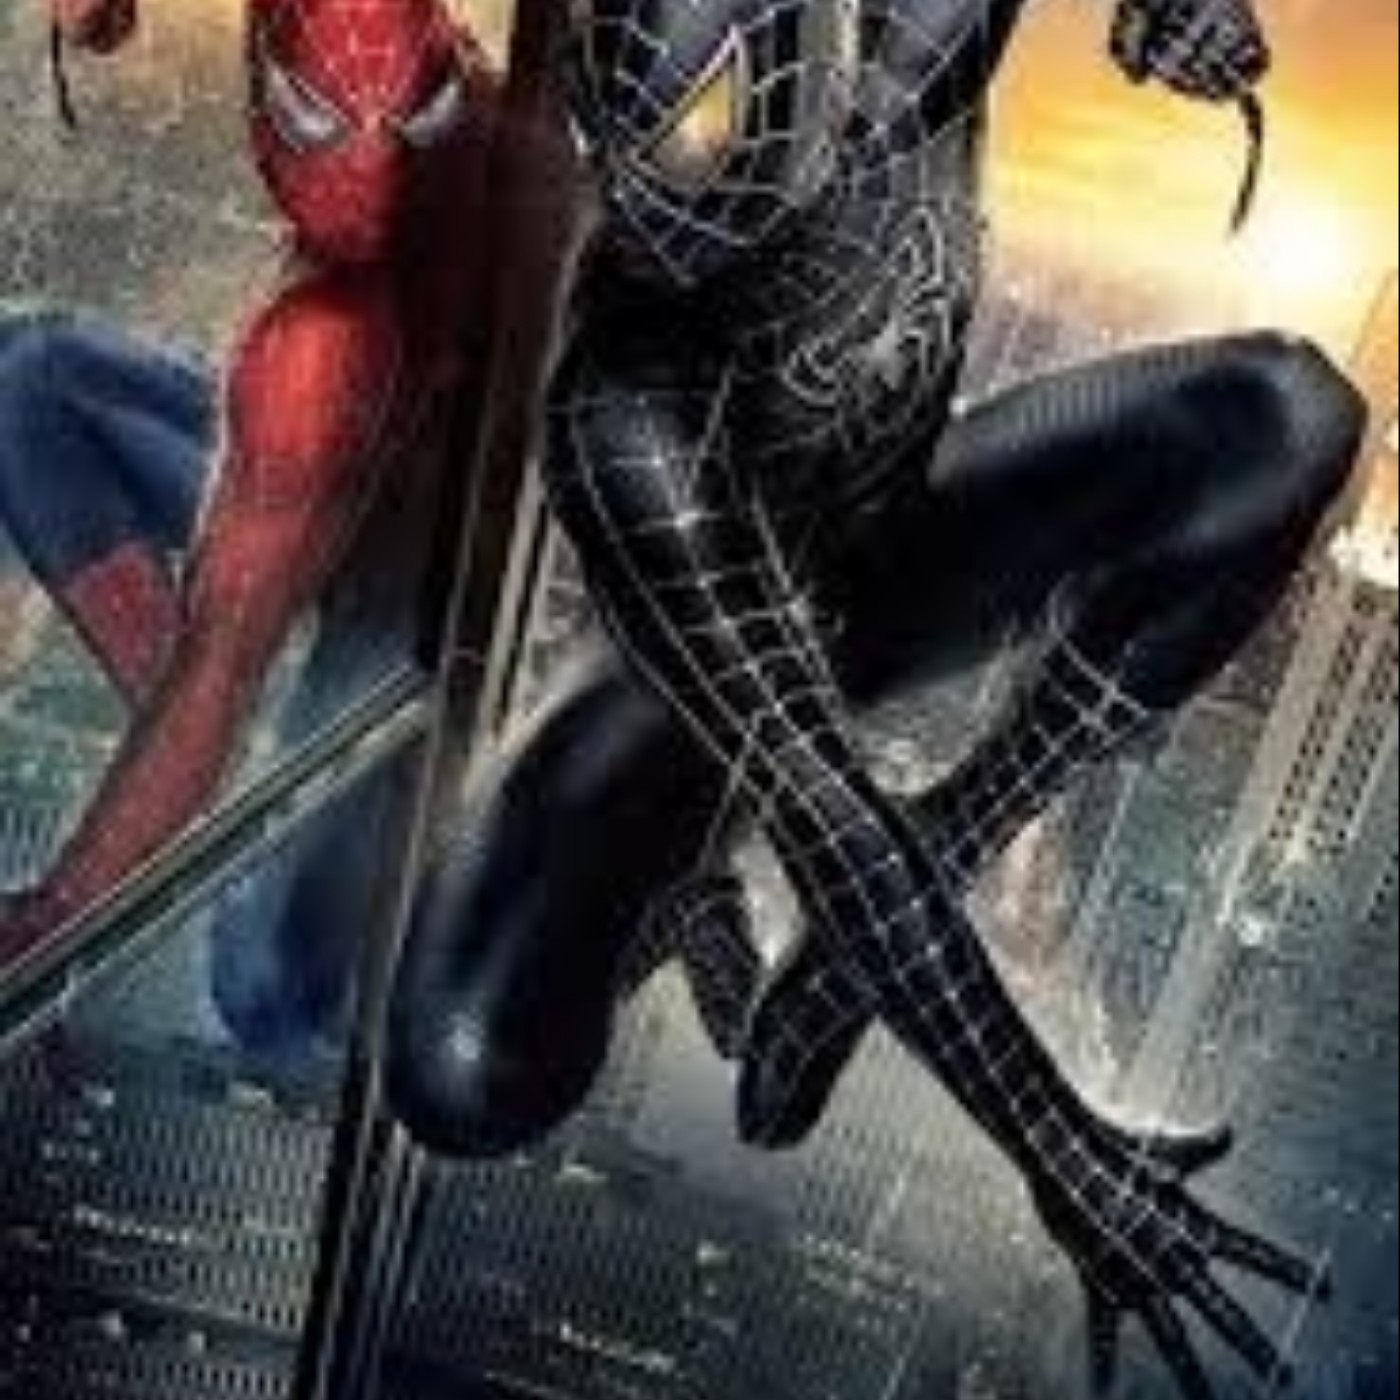 HD Online Player (spiderman 1 2 3 Movie Torrent) | Podcast on SoundOn